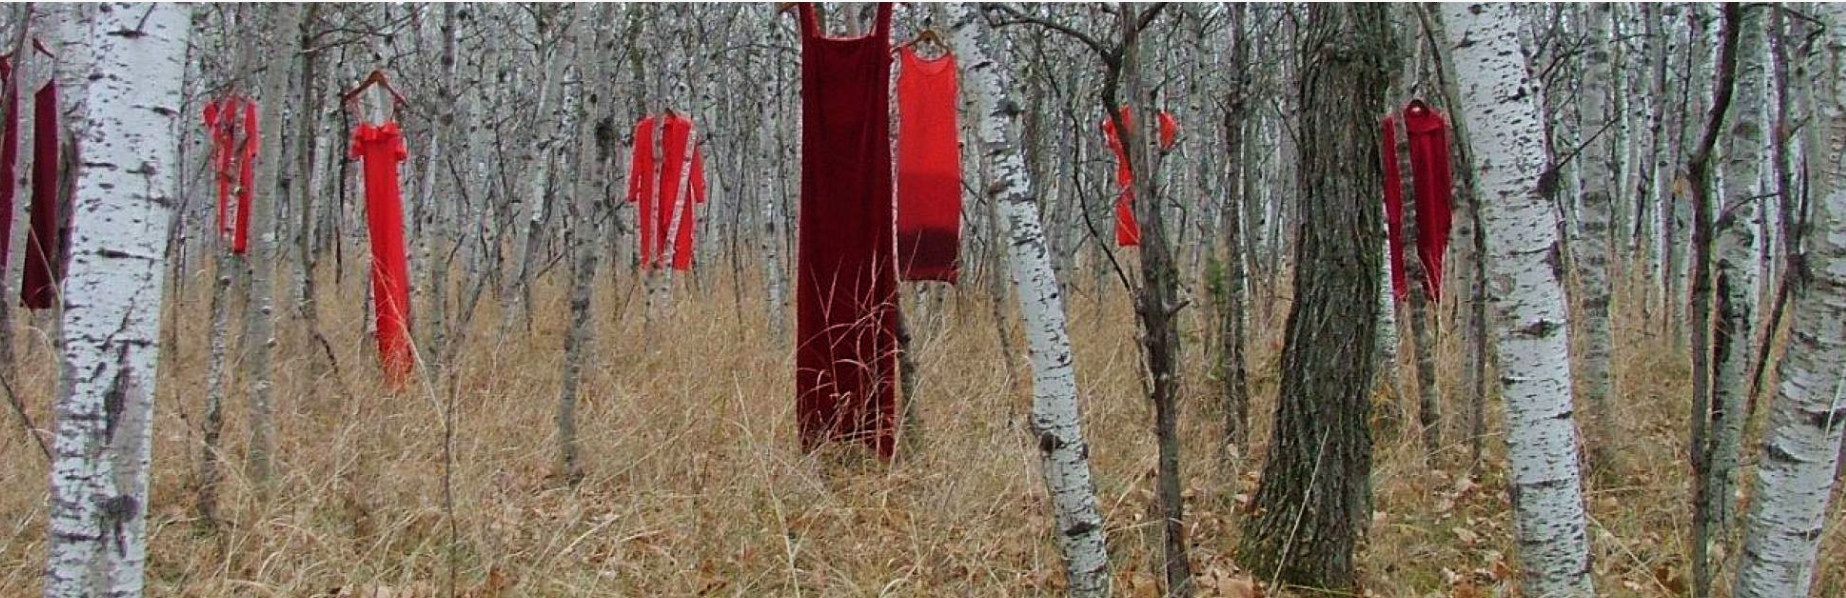 An art exhibition showing red dresses hanging from trees